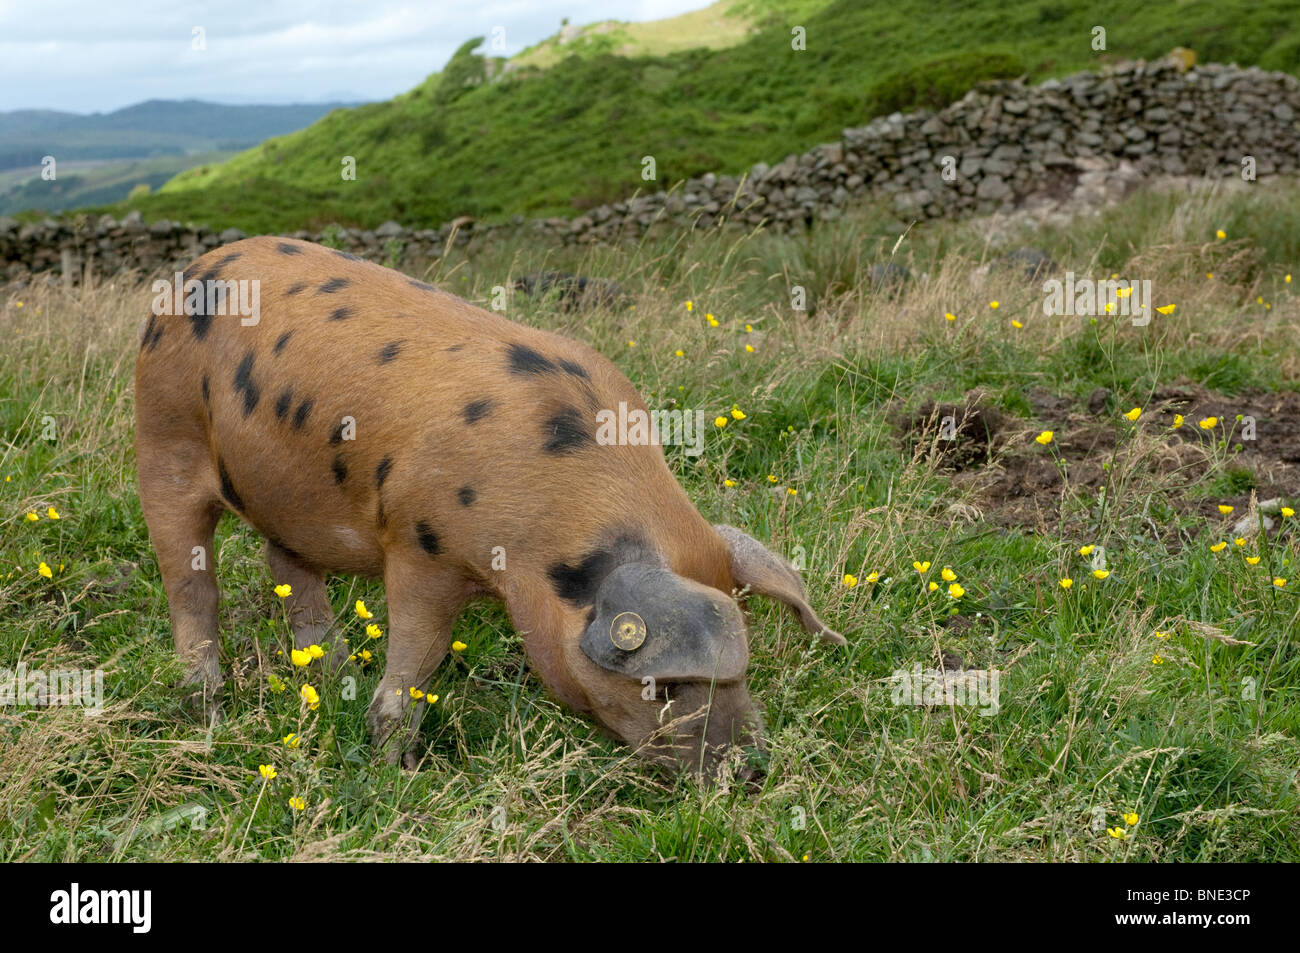 Oxford Sandy and Black weaner pigs rooting on pasture Stock Photo